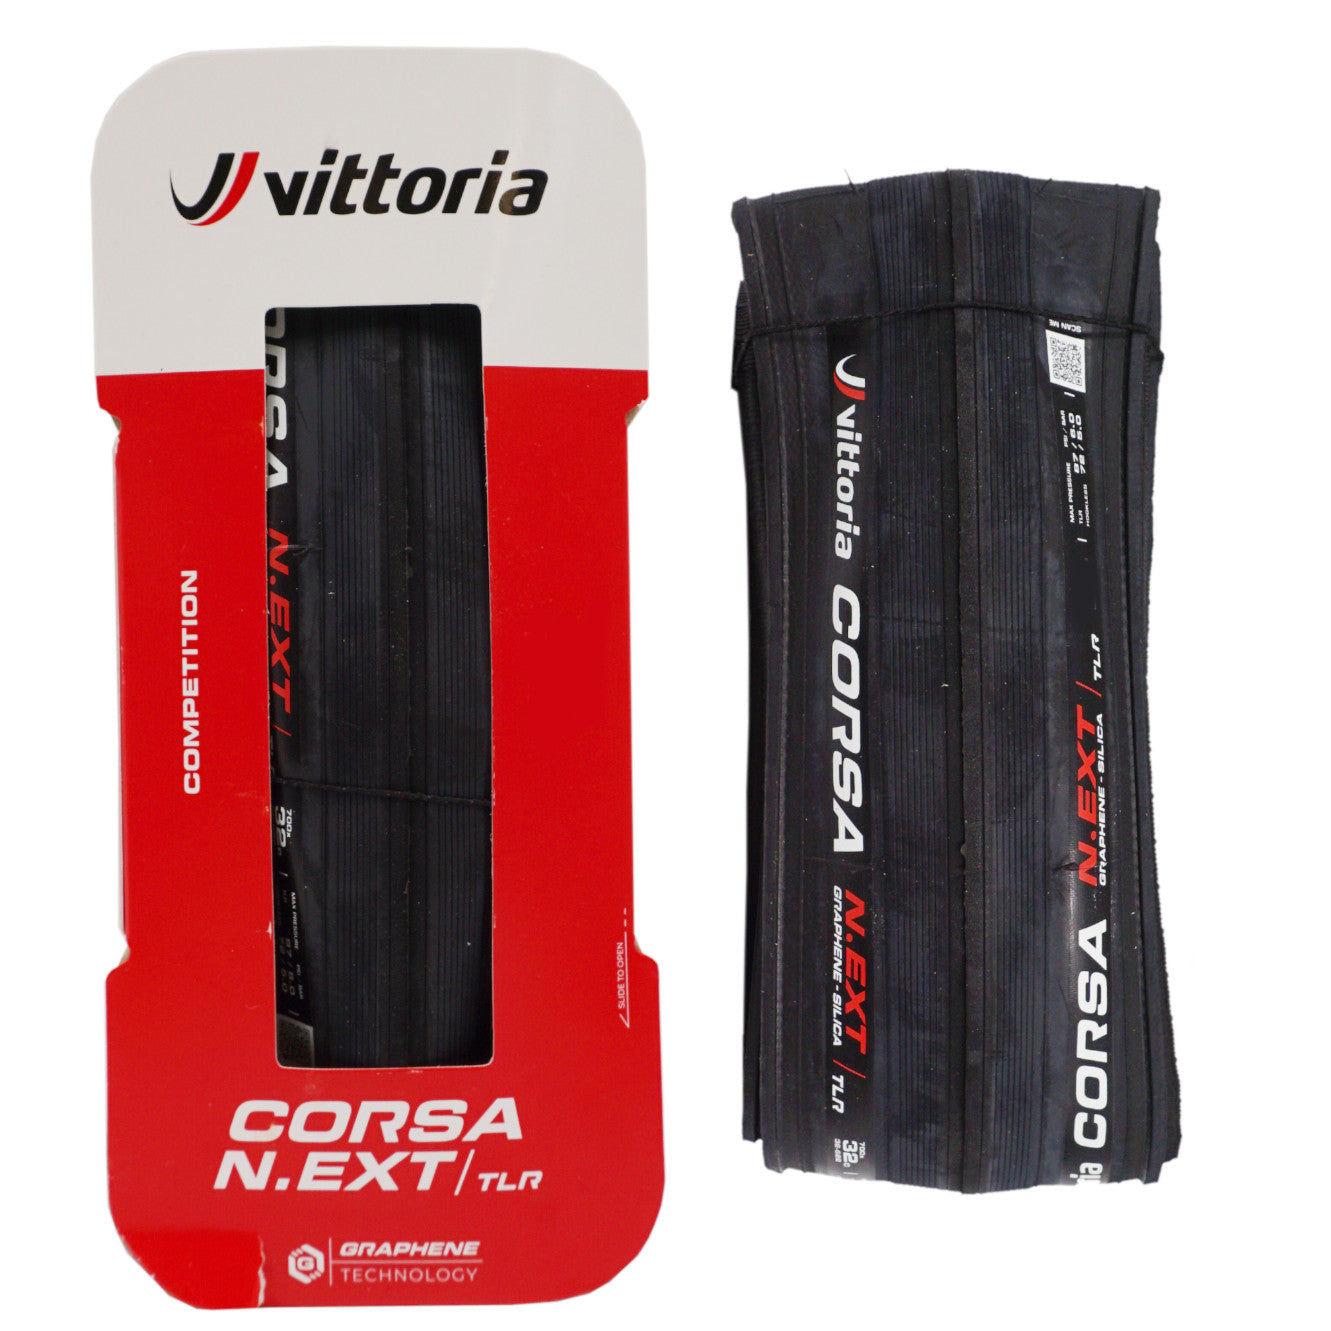 Vittoria Corsa N.EXT TLR 700c Tubeless Road Tire